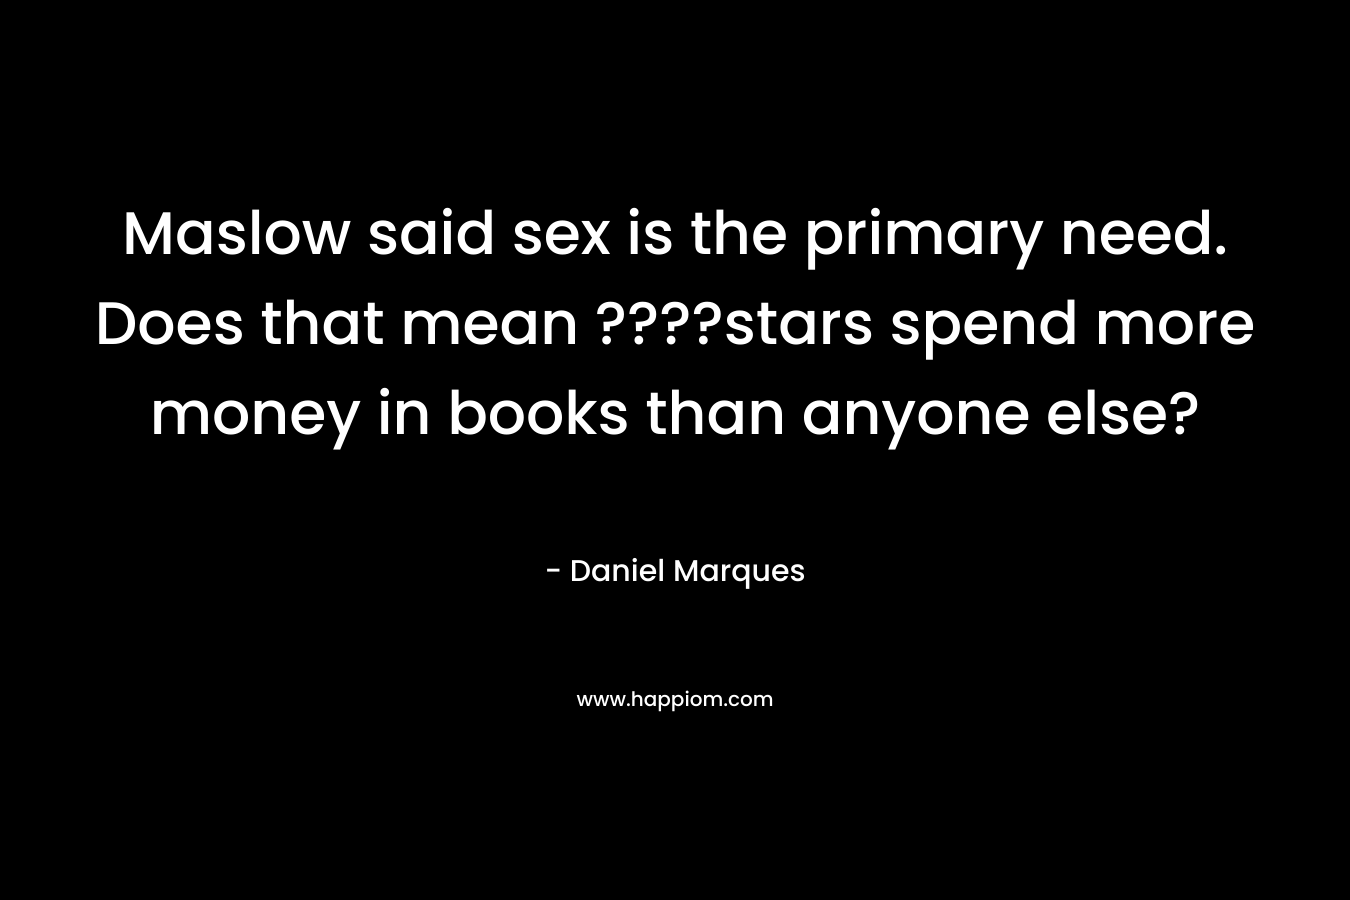 Maslow said sex is the primary need. Does that mean ????stars spend more money in books than anyone else? – Daniel Marques